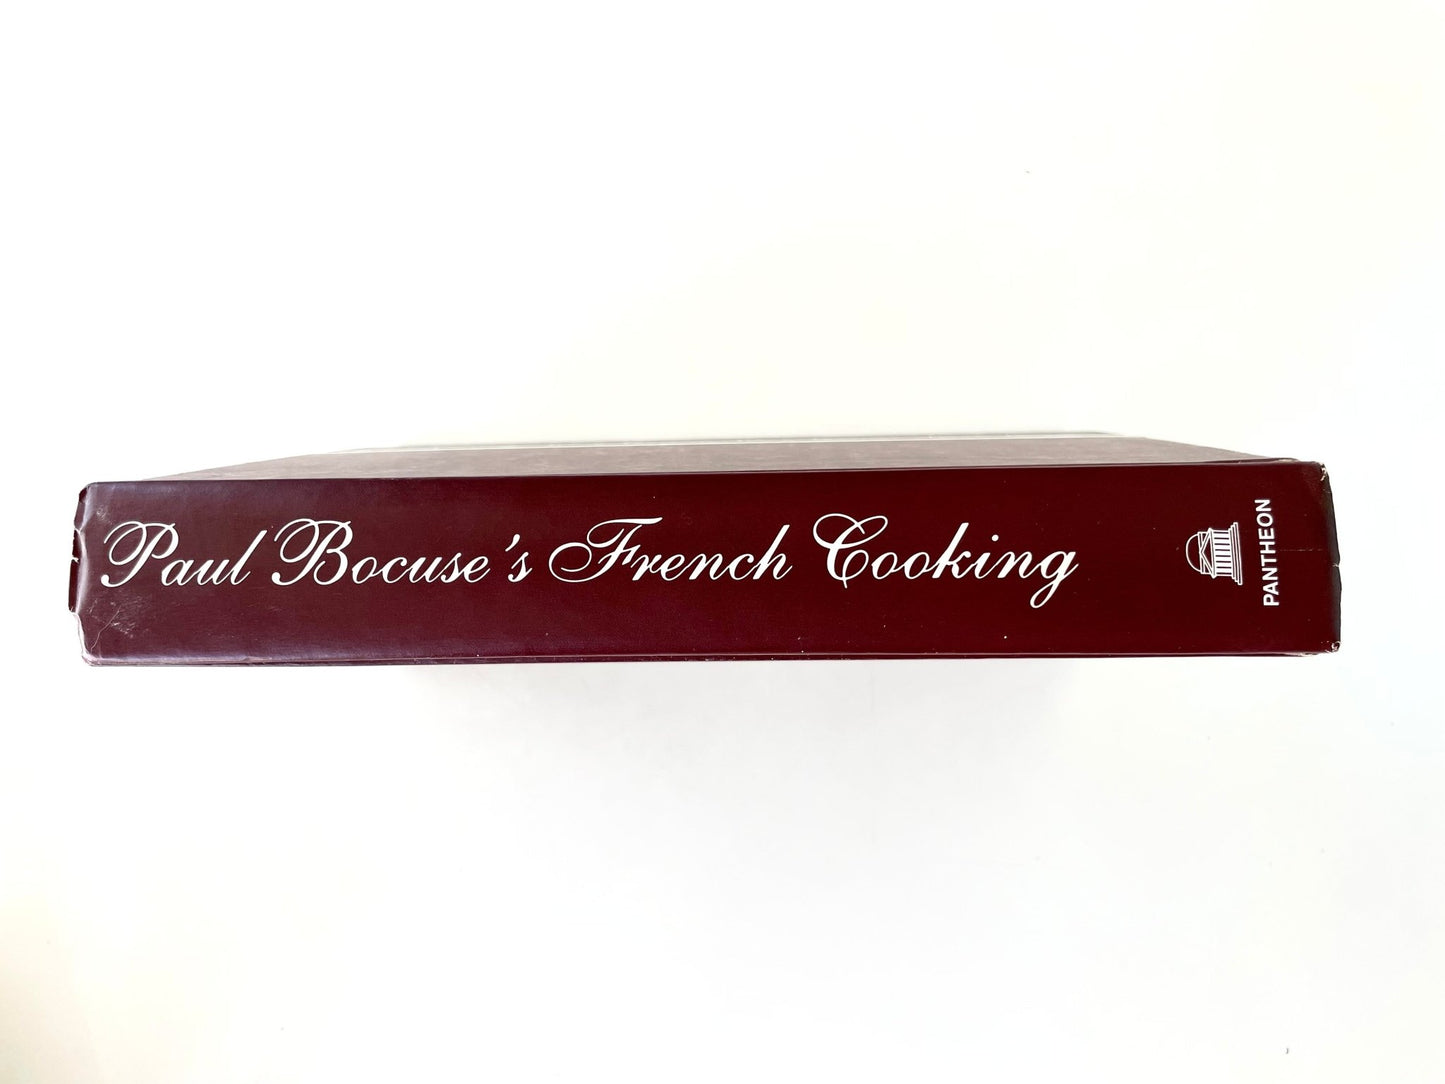 French Cooking by Paul Bocuse - TrueCooks